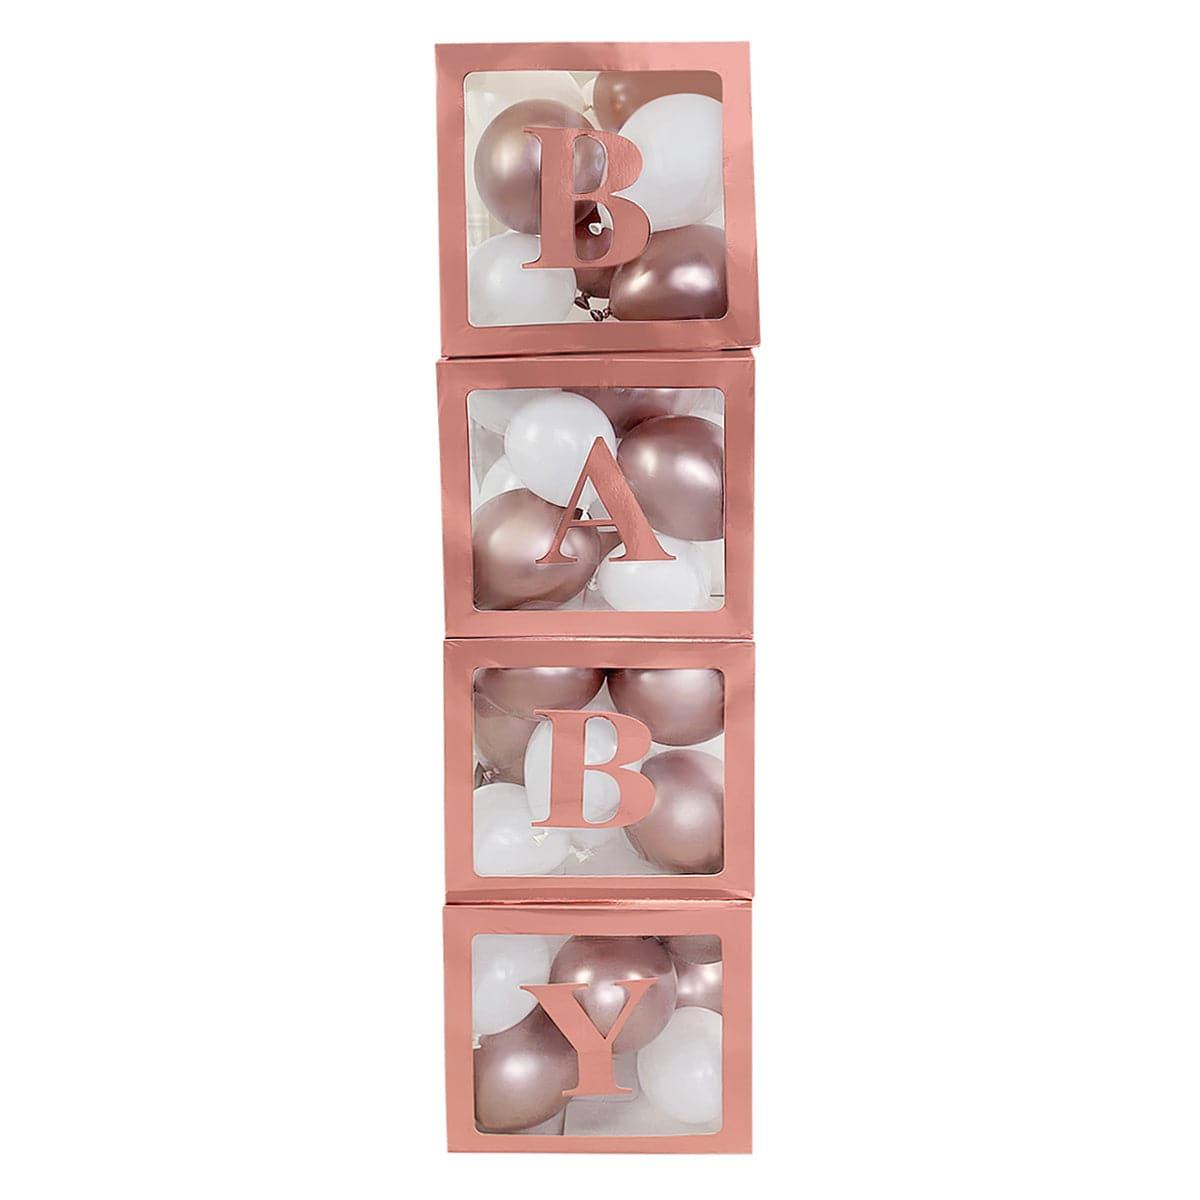 Yiwu PaiJing Import & Export Co., Ltd Baby Shower Rose Gold Clear Balloon Boxes with "Baby" Letters, 4 Count